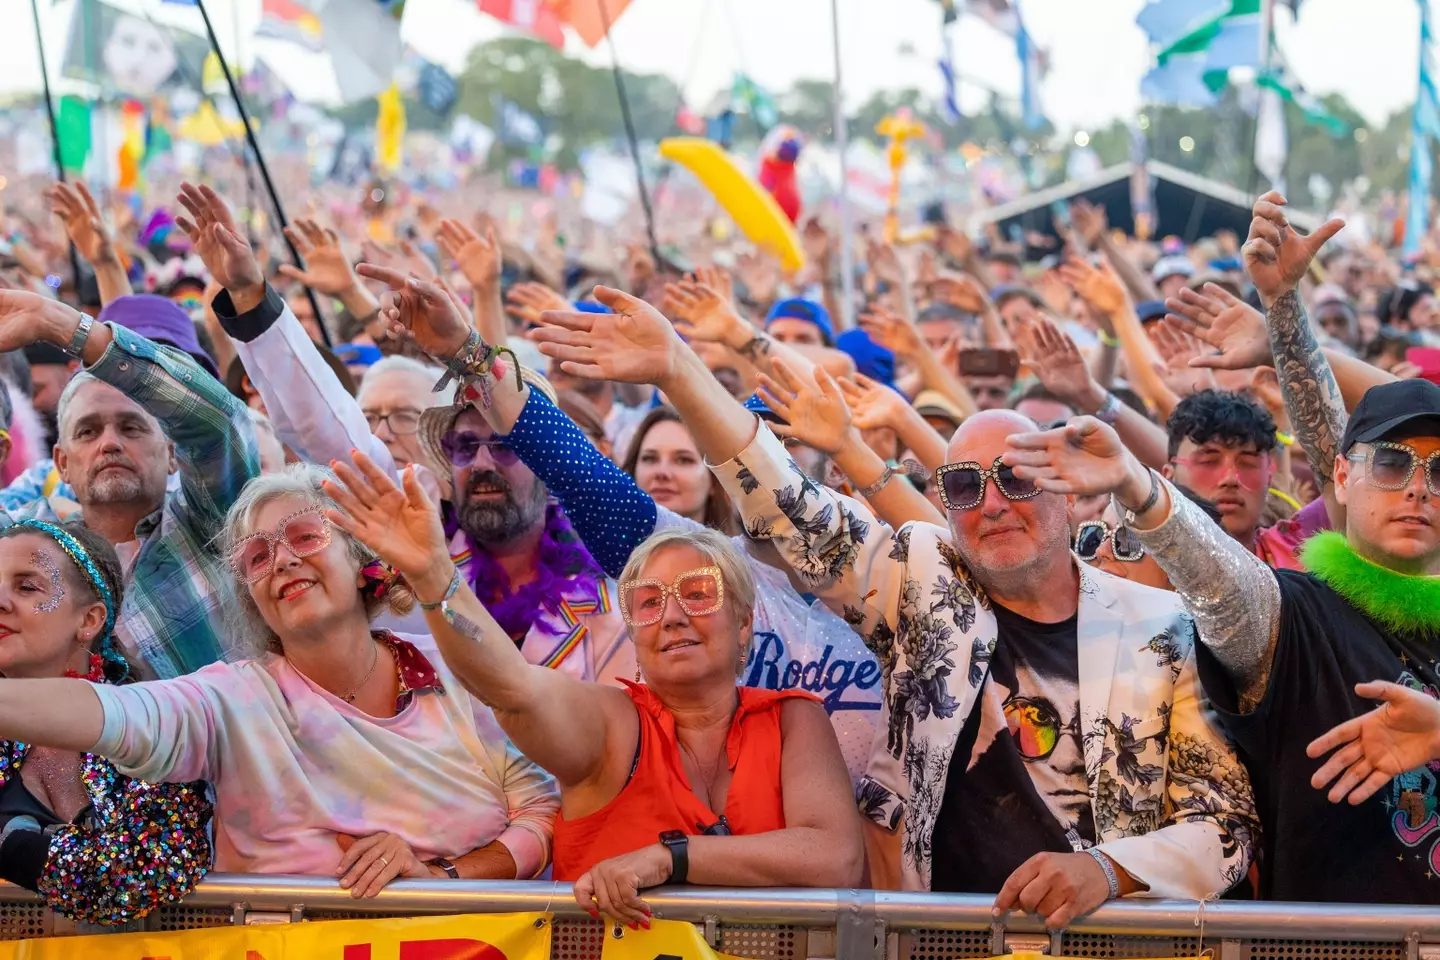 What do we think to that line-up Glastonbury fans?